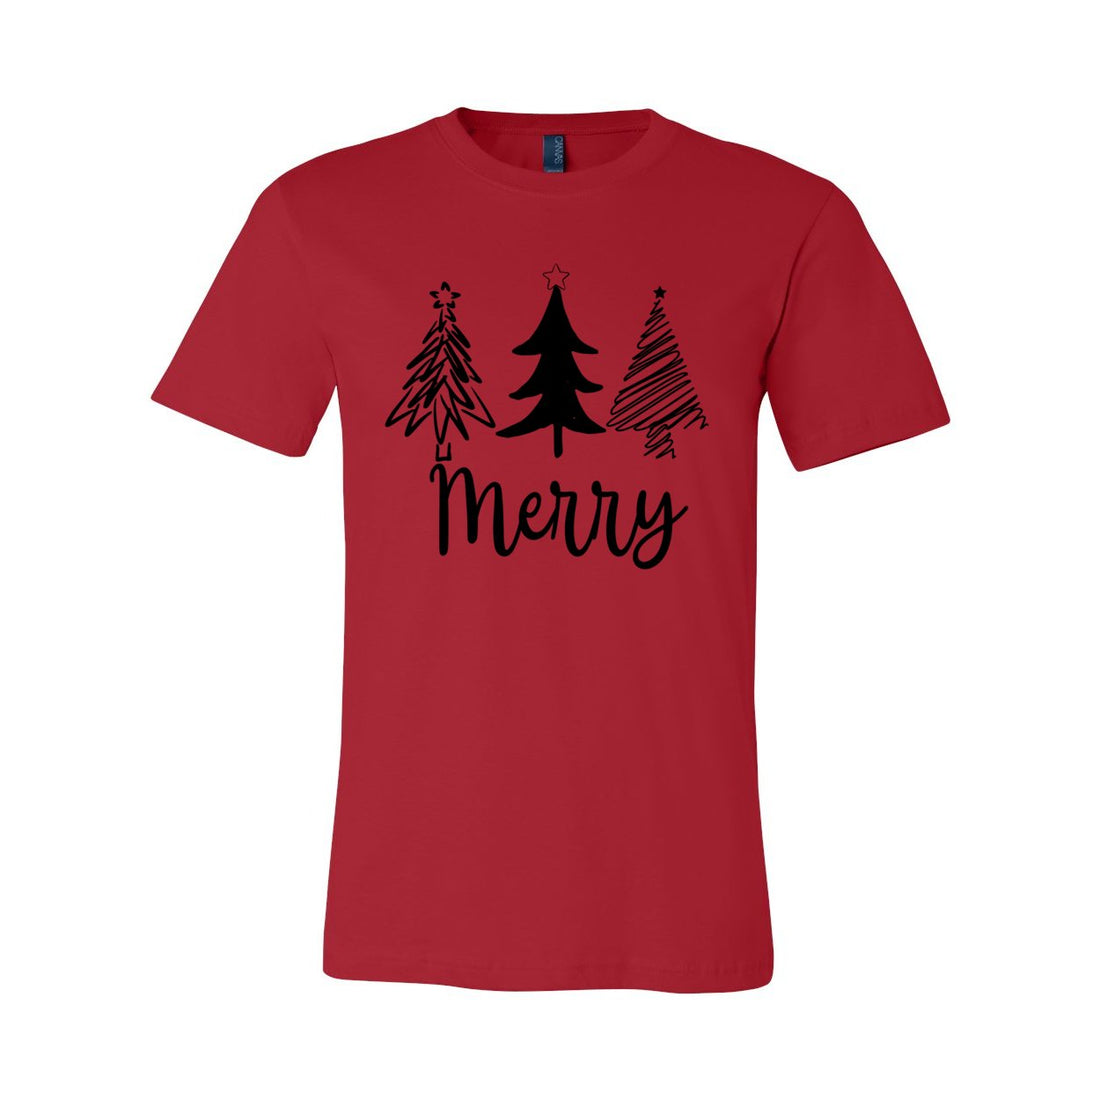 Merry Trees - T-Shirts - Positively Sassy - Merry Trees